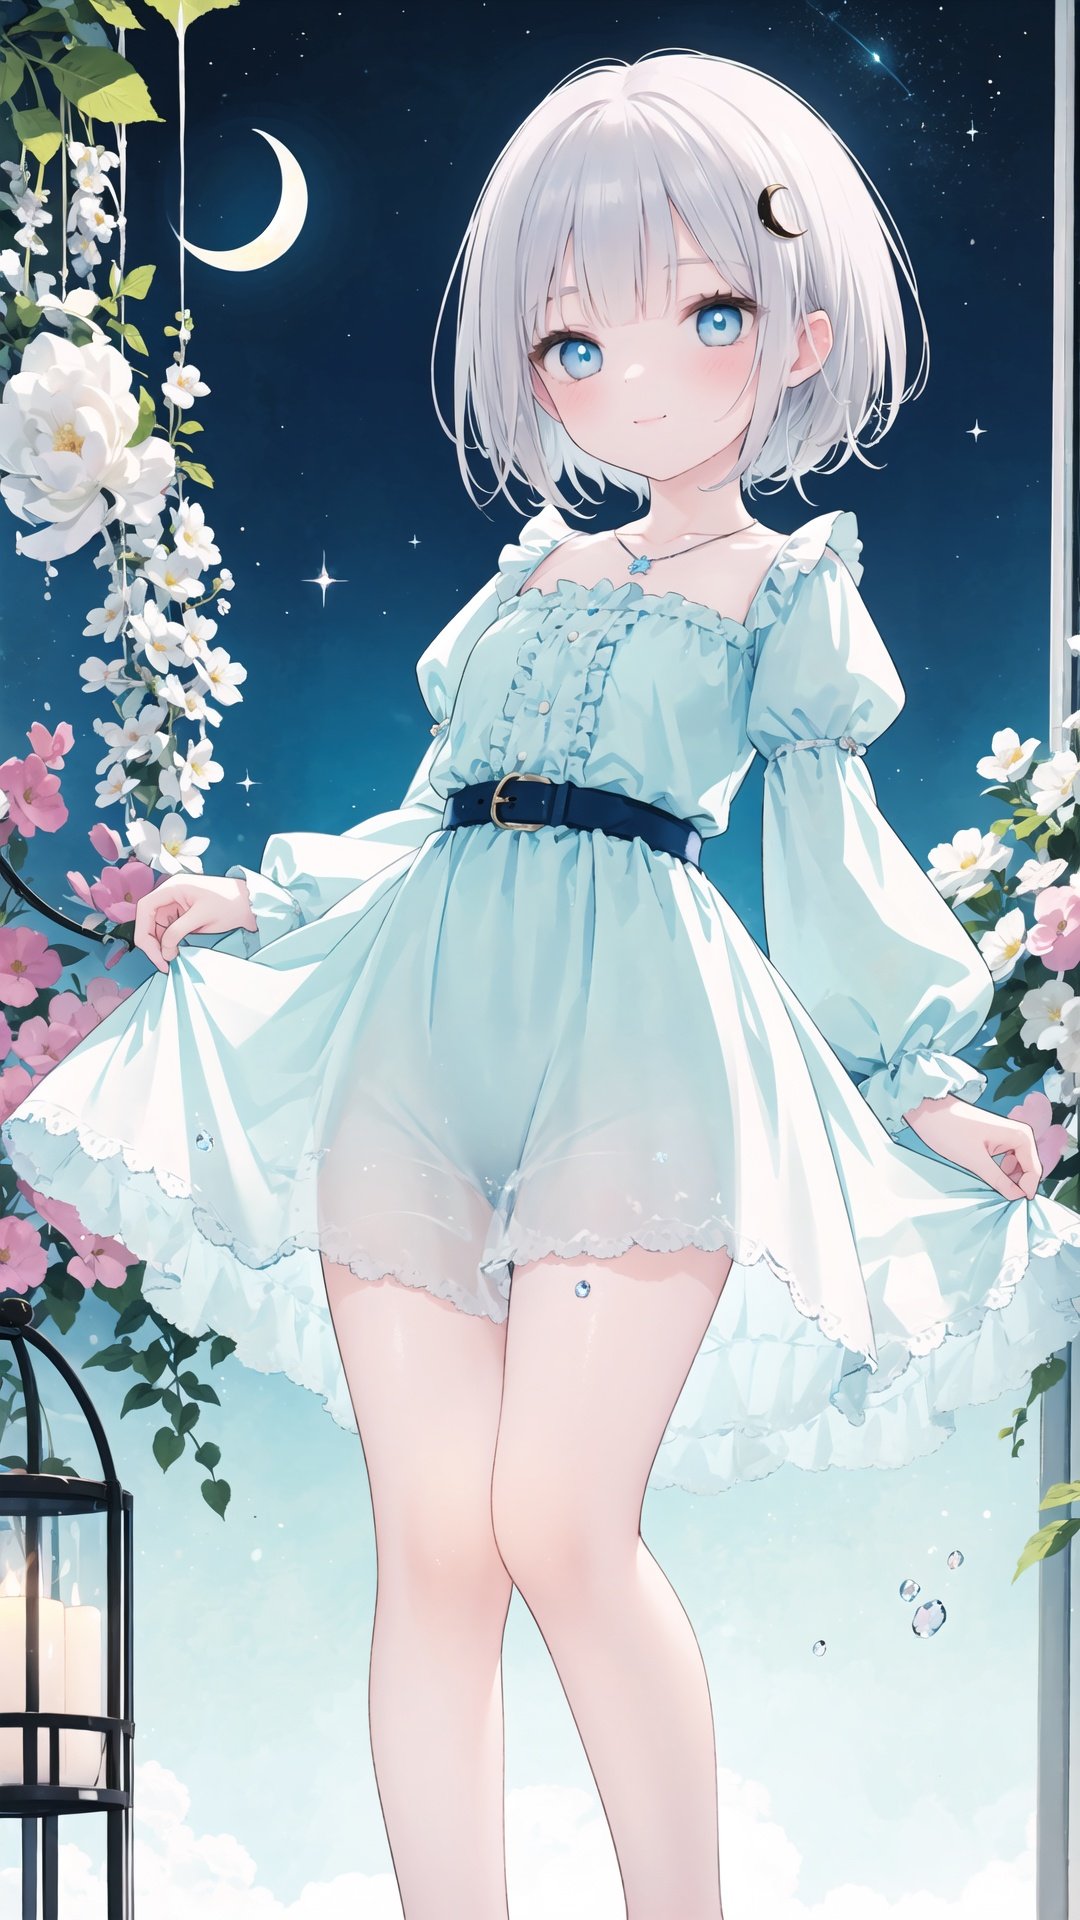 1girl, solo, watercolor, delicate strokes, shimmering hues, transparent, ethereal, crystal-clear, twinkling, light refracting, youthful, innocent, small, petite, short stature, fair complexion, rosy cheeks, bright blue eyes, large round eyes, wide-eyed, gentle smile, silver hair, bob cut, chin-length, hair clip, star-shaped hair clip, deep blue eyes, round face, childlike innocence, slender frame, slender arms, small breasts, frilly dress, pastel colors, lavender dress, lace details, puffy sleeves, knee-length skirt, ribbon belt, crystal necklace, barefoot, floating in mid-air, dreamy background, starry night sky, celestial patterns, twinkling stars, crescent moon, shimmering constellations.